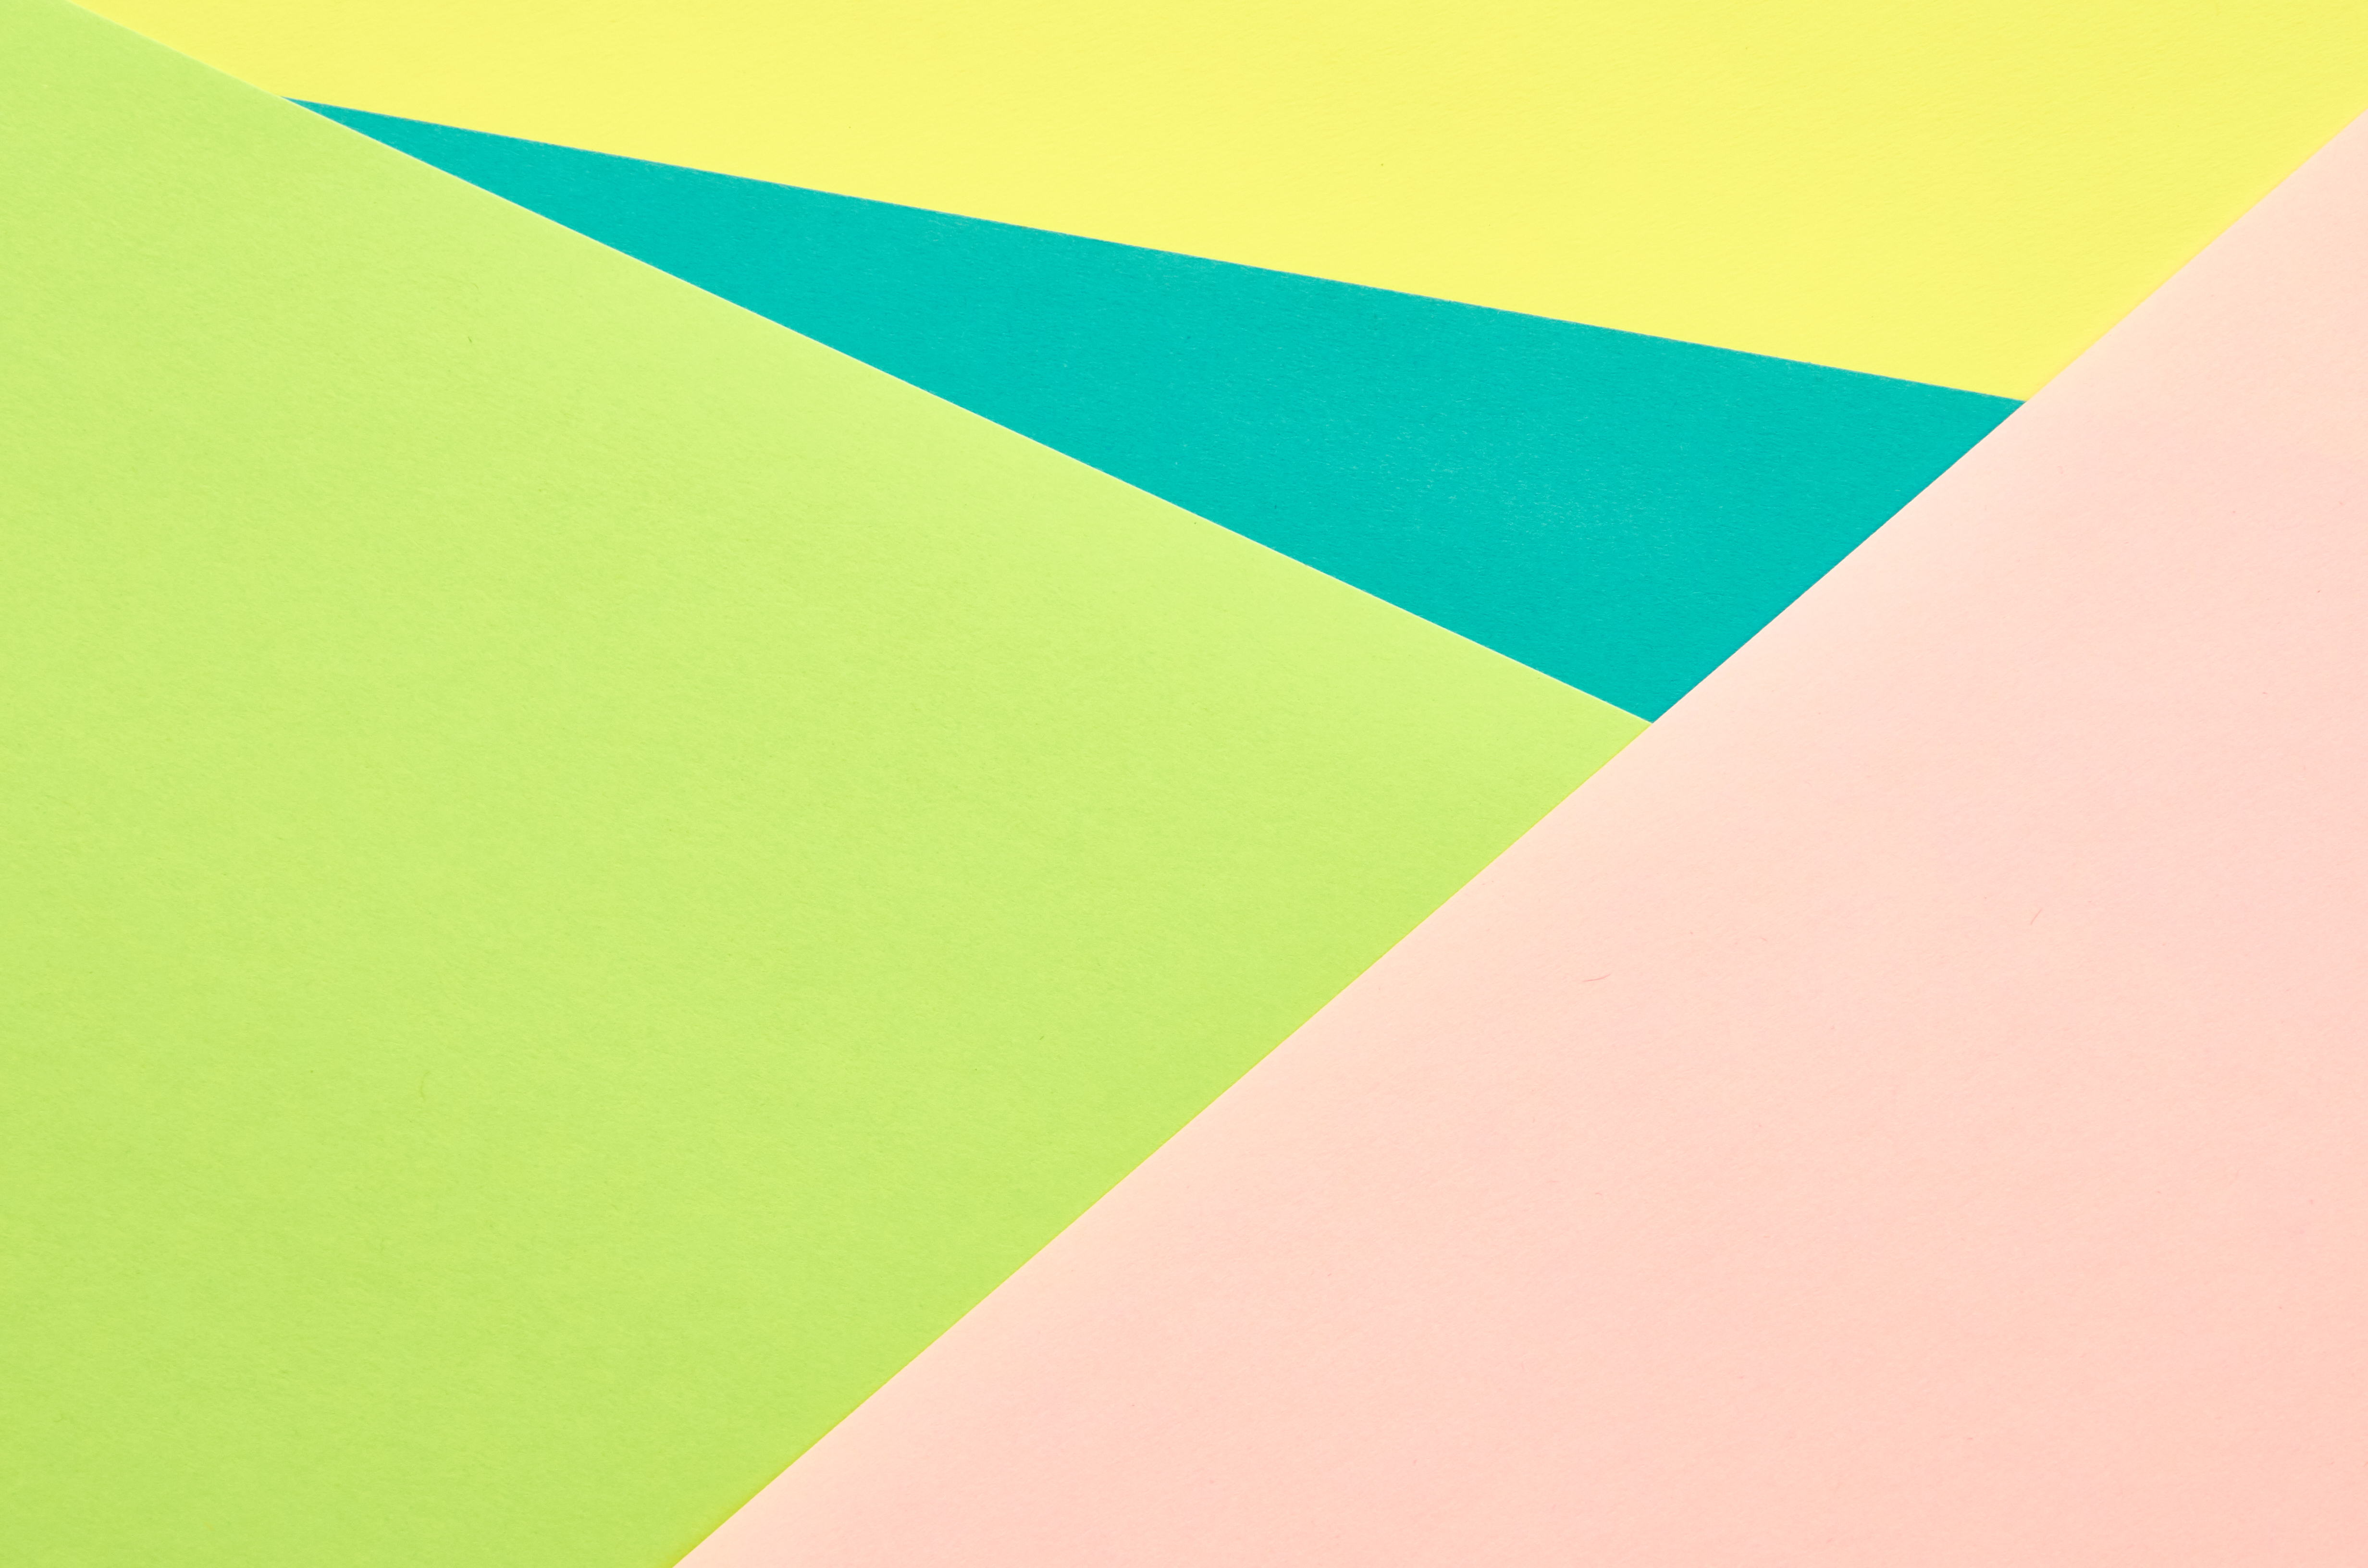 Mobile wallpaper motley, multicolored, abstract, shape, shapes, triangles, fragments